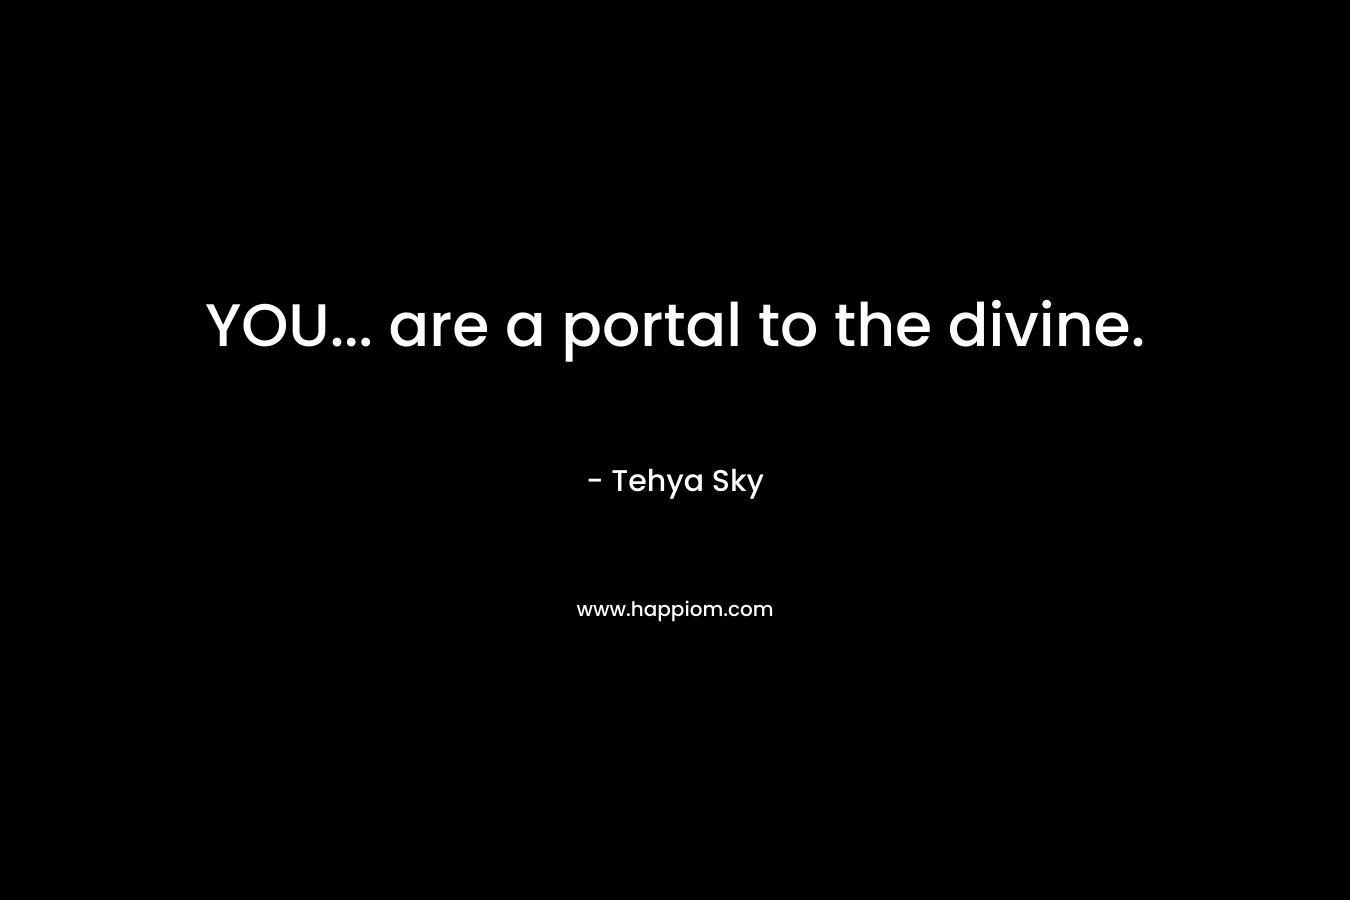 YOU... are a portal to the divine.